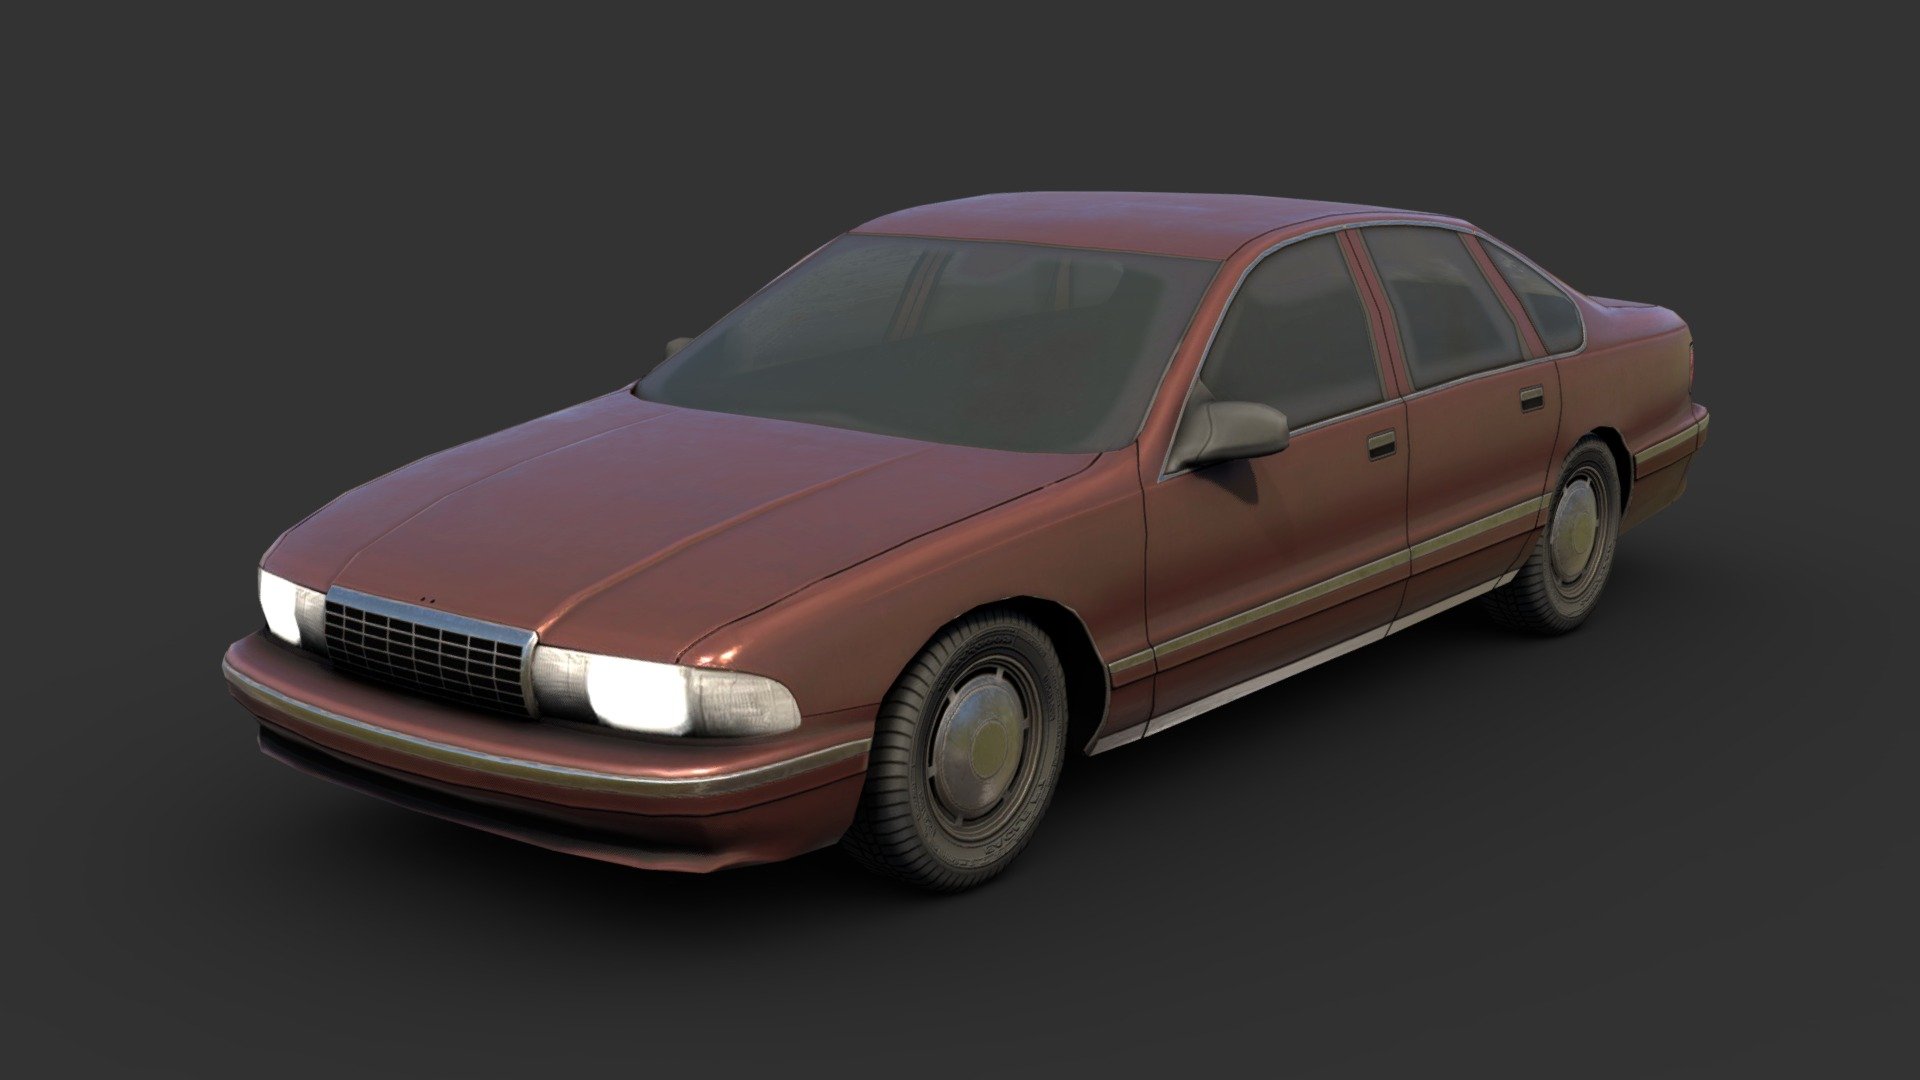 Lowpoly car made as filler for a 1990s suburban scene. 

Made with 3DSMax, Topogun, and Substance Painter 3d model